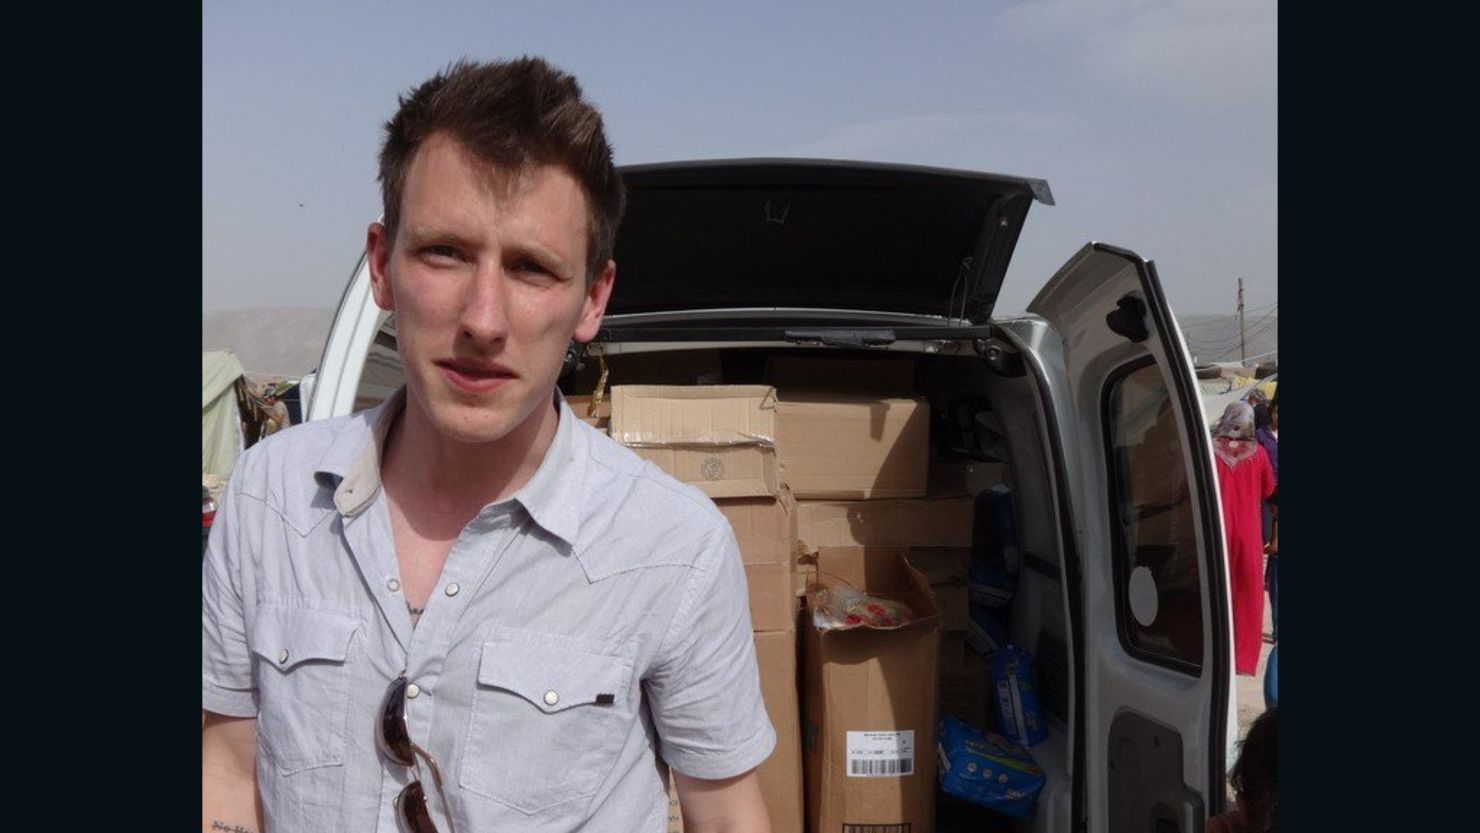 Peter Kassig, pictured near the Syrian border between late 2012 and autumn 2013, converted to Islam while in captivity.